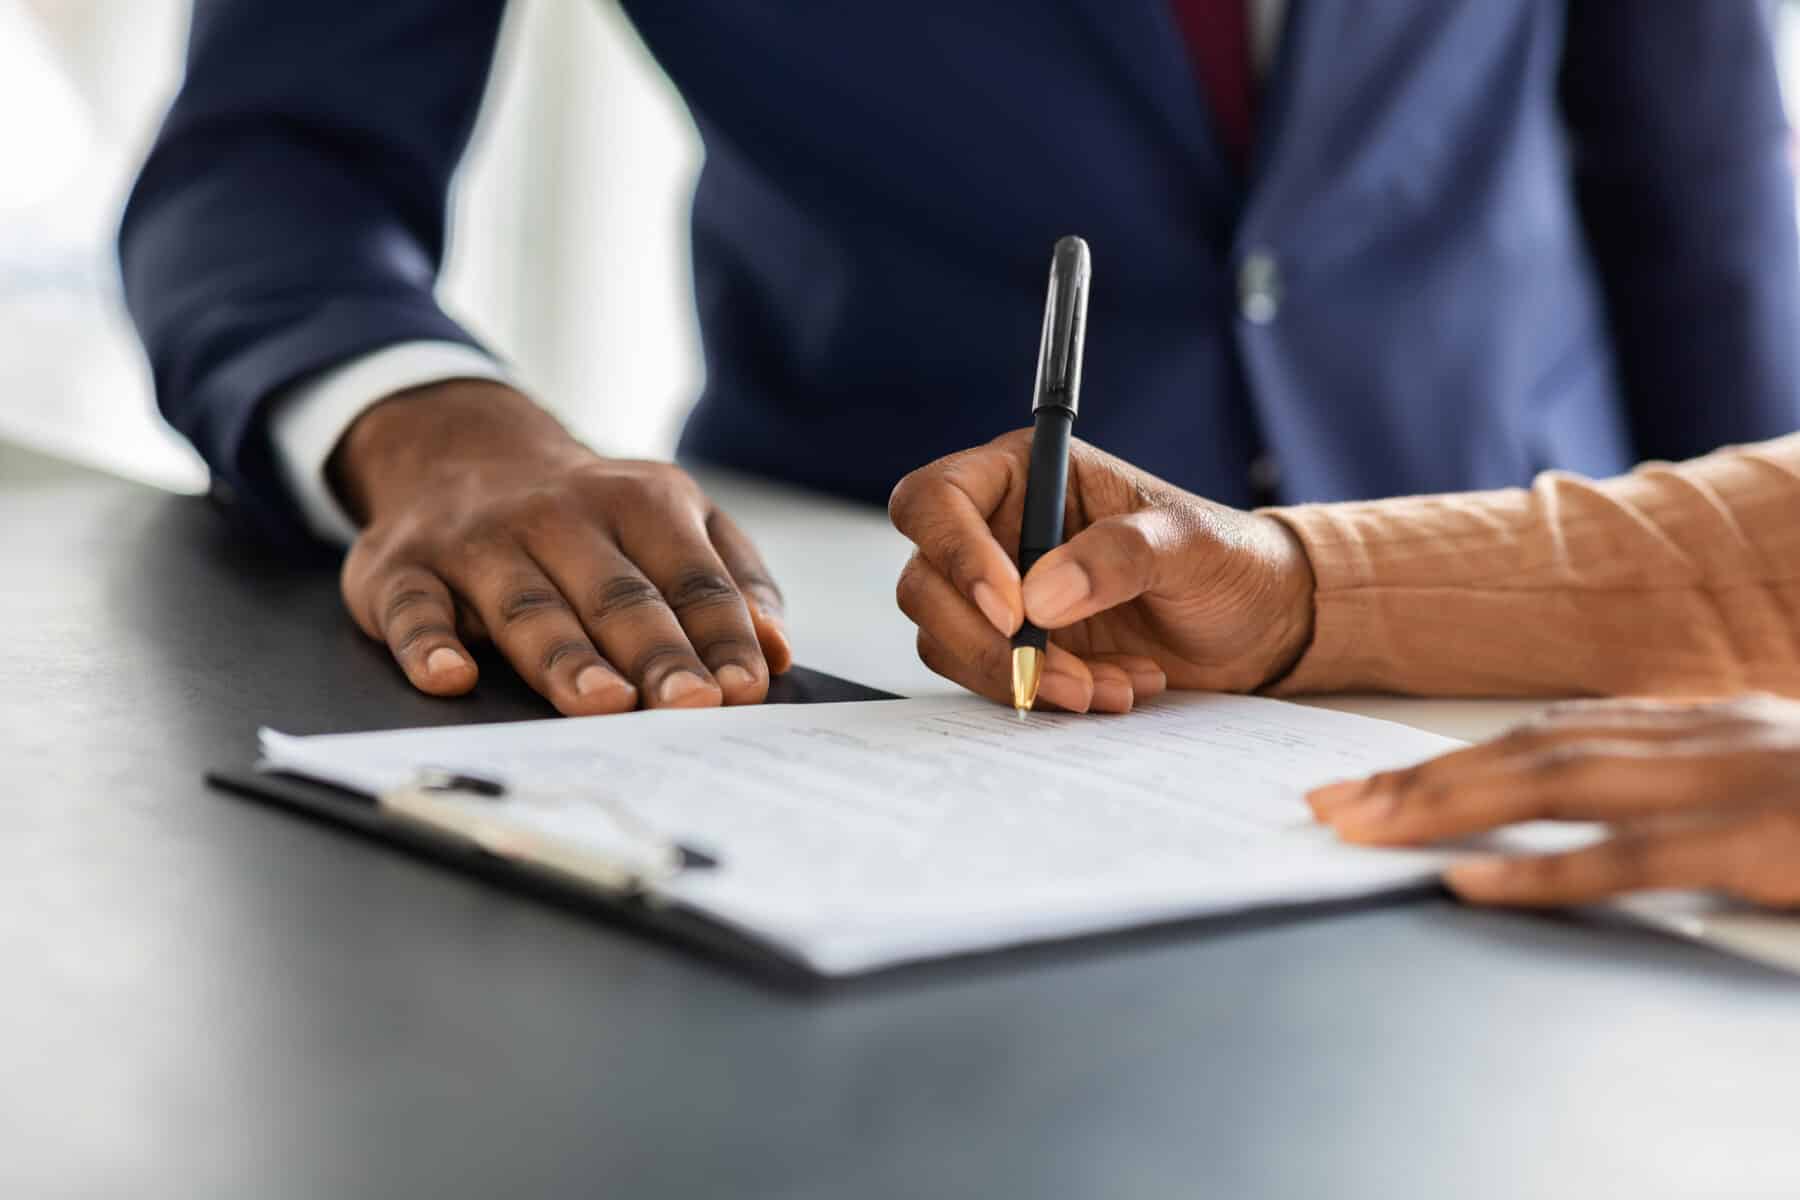 Two people signing contract, close-up of hands.